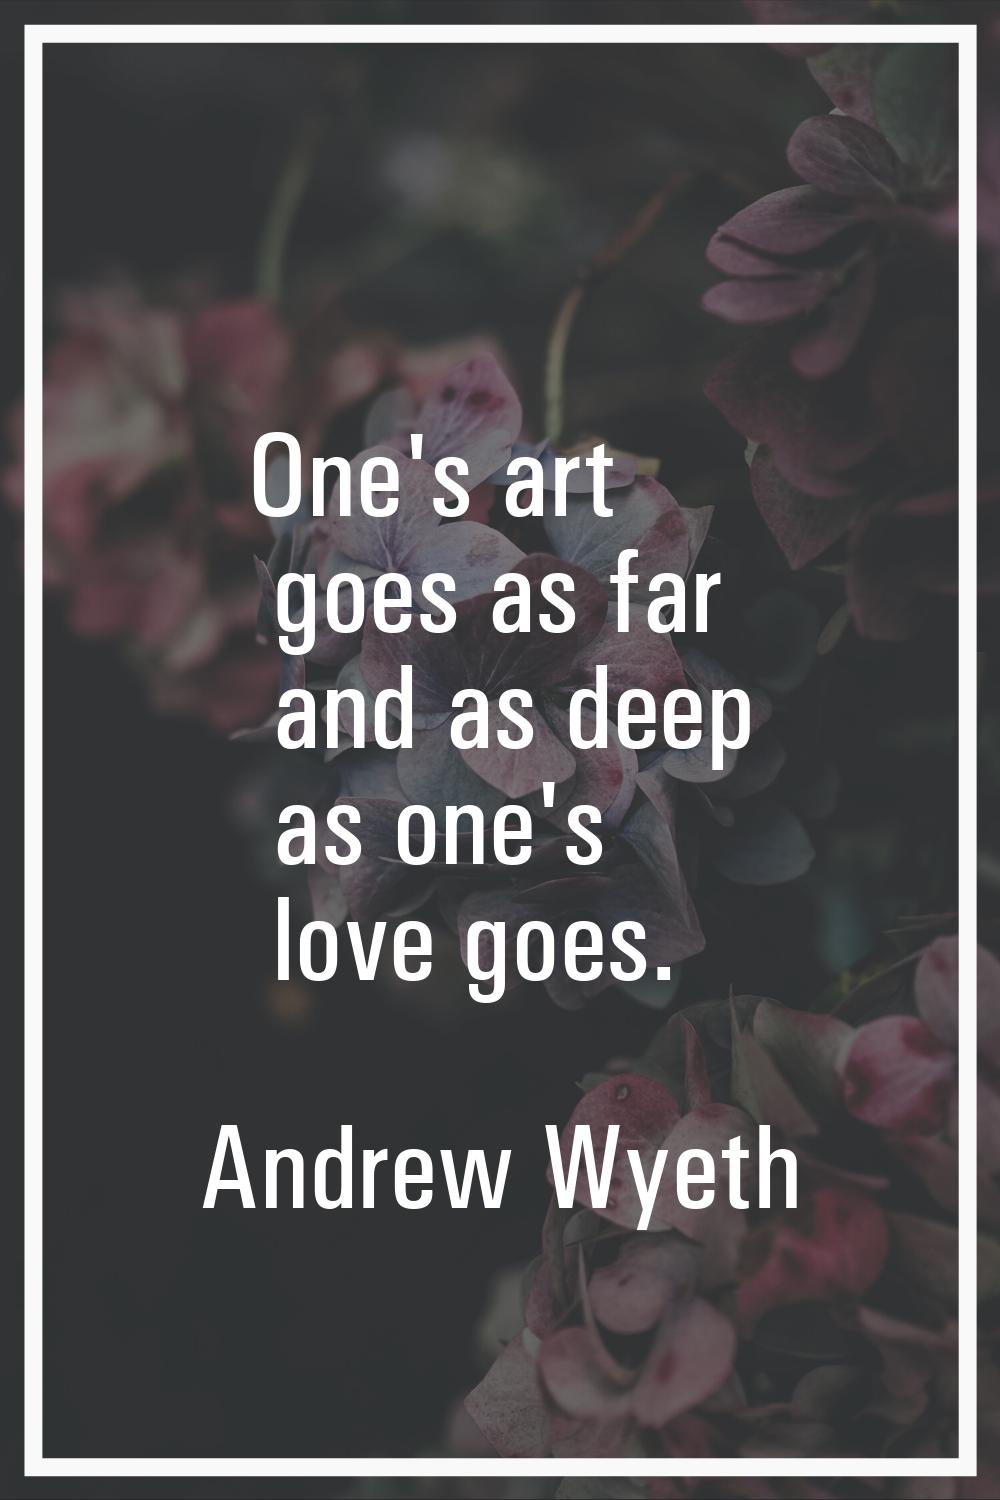 One's art goes as far and as deep as one's love goes.